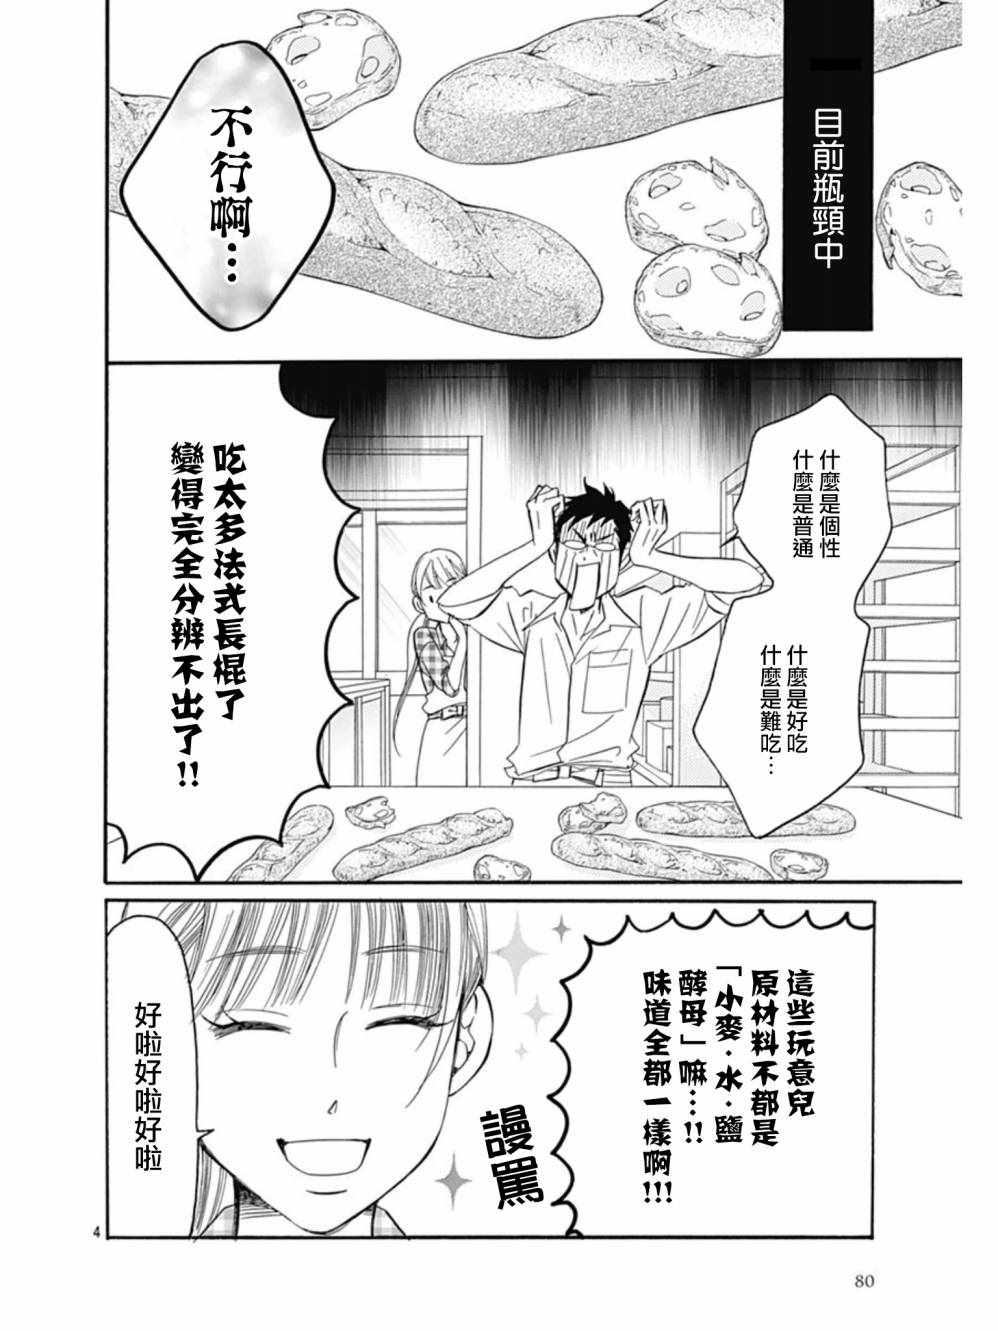 Bread&Butter - 第27話 - 4